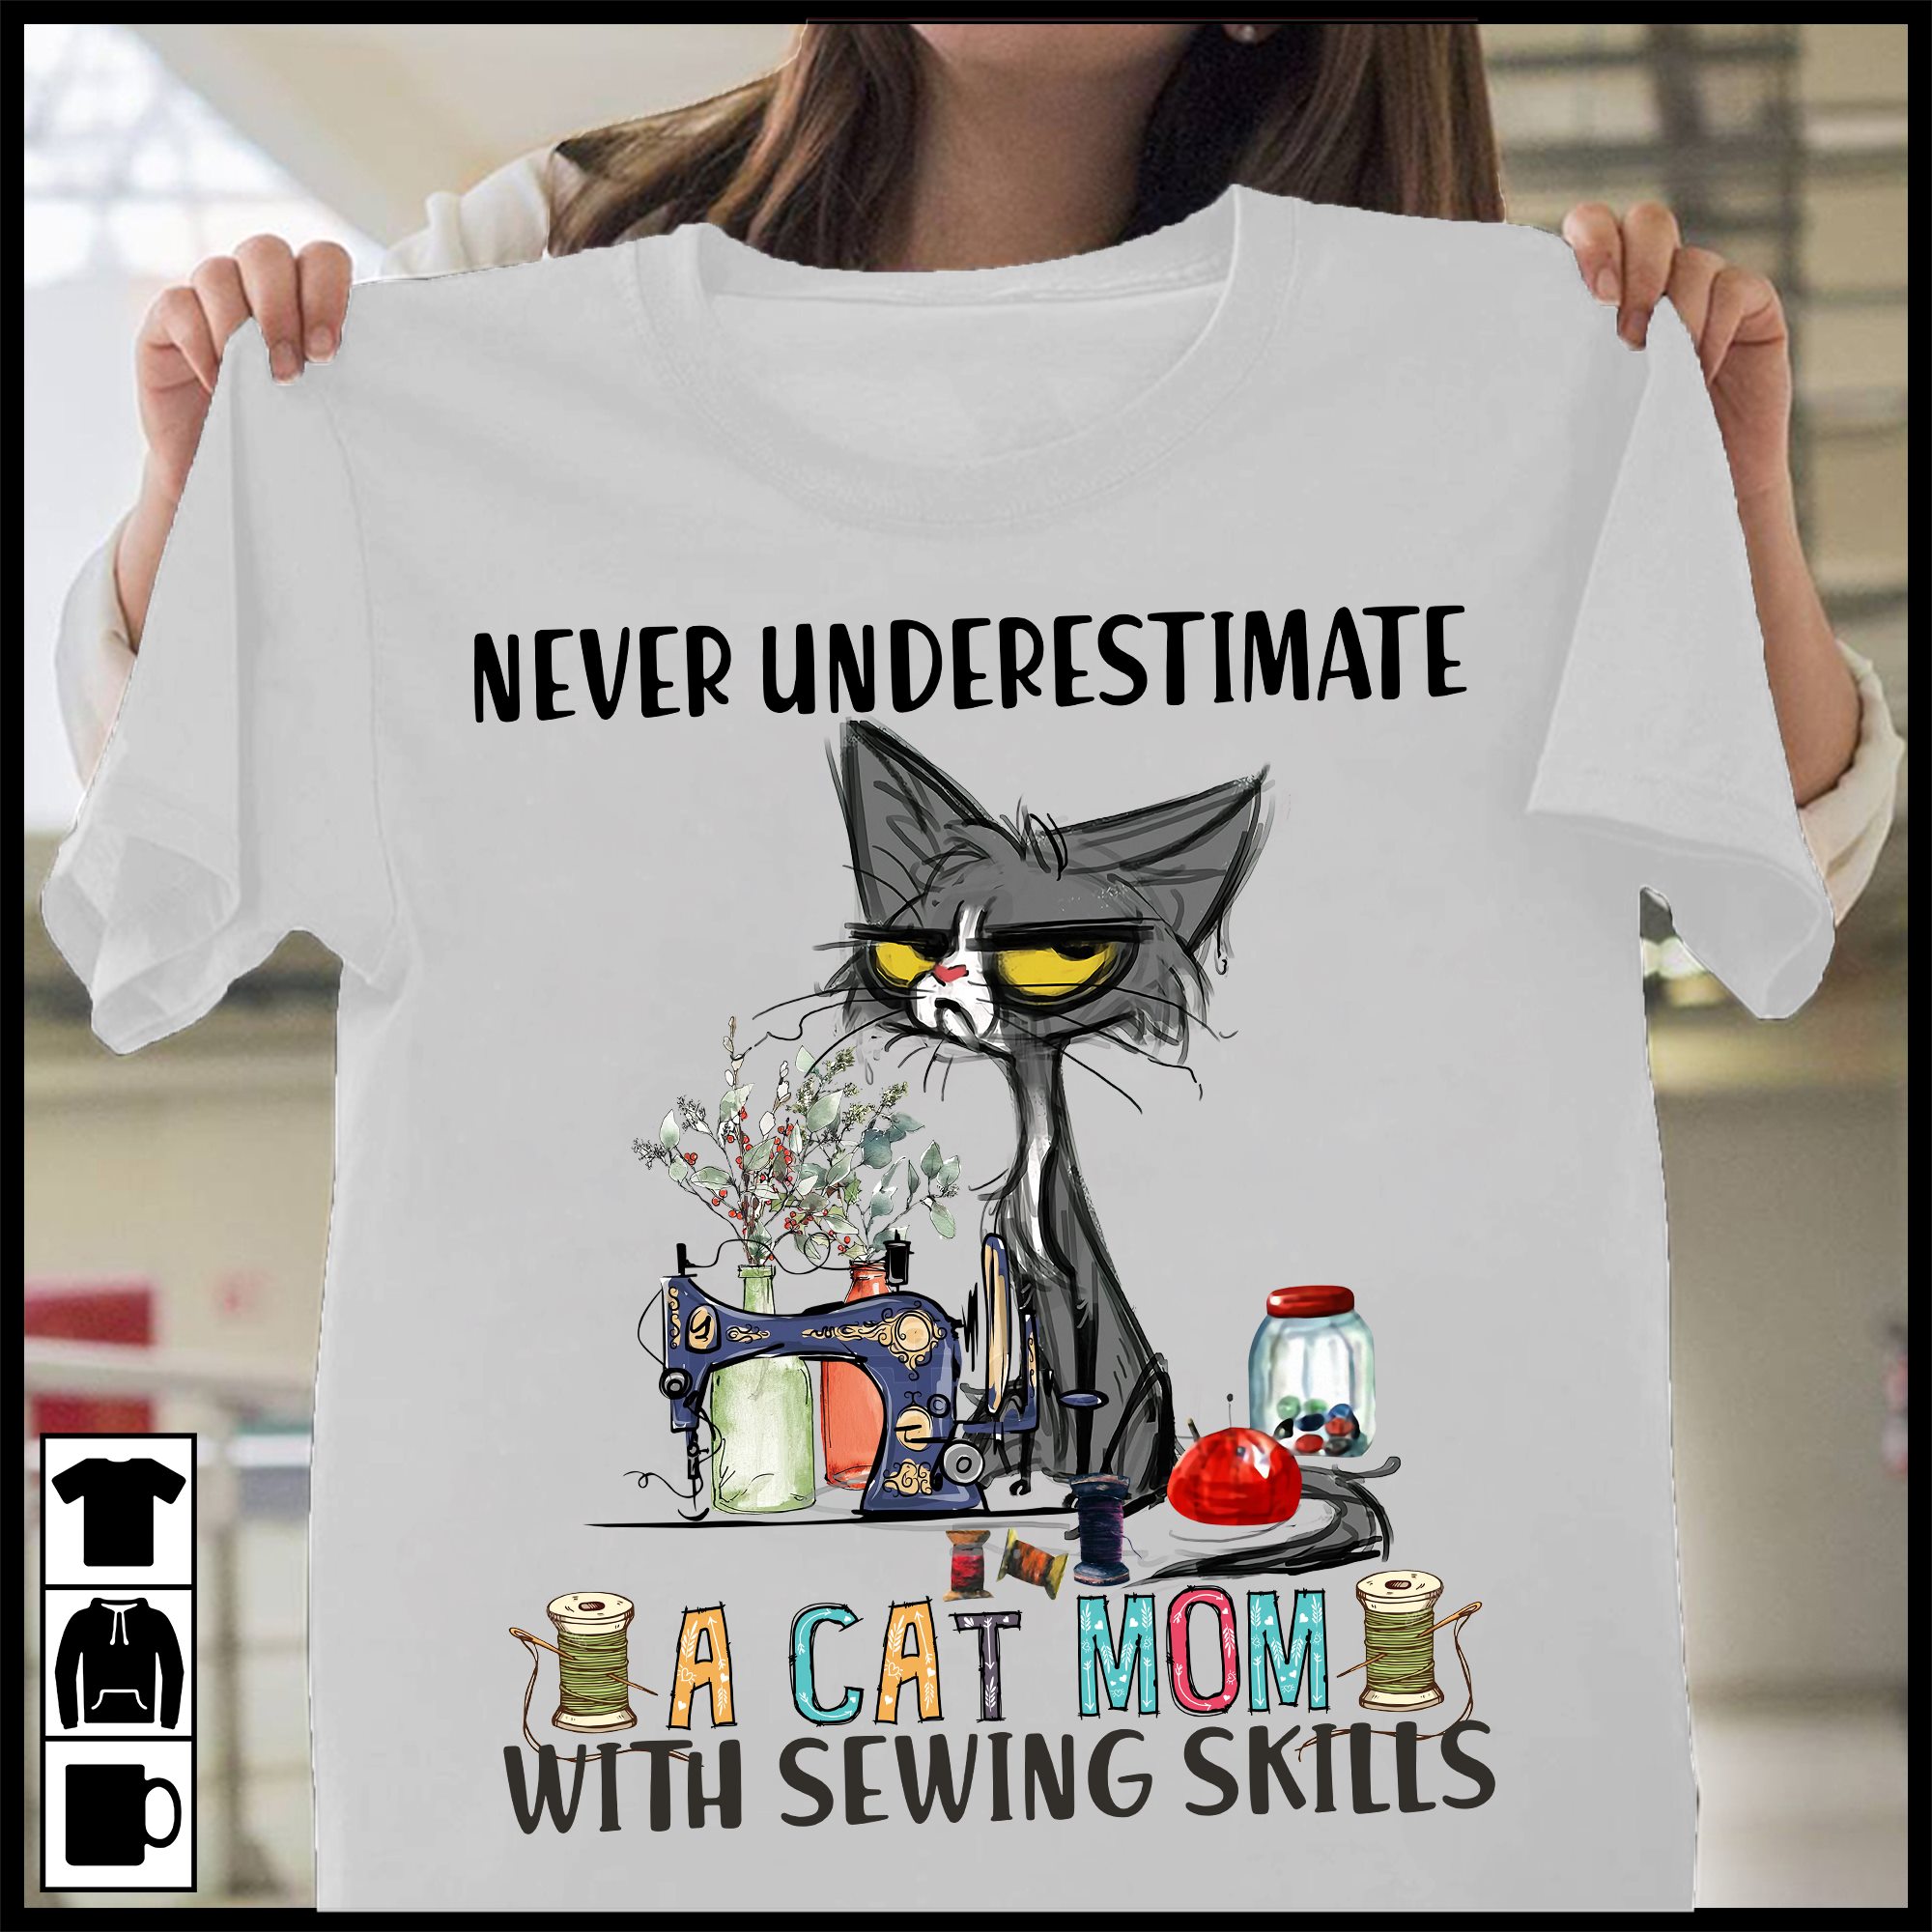 Never underestimate a cat mom with sewing skills - Cat mom